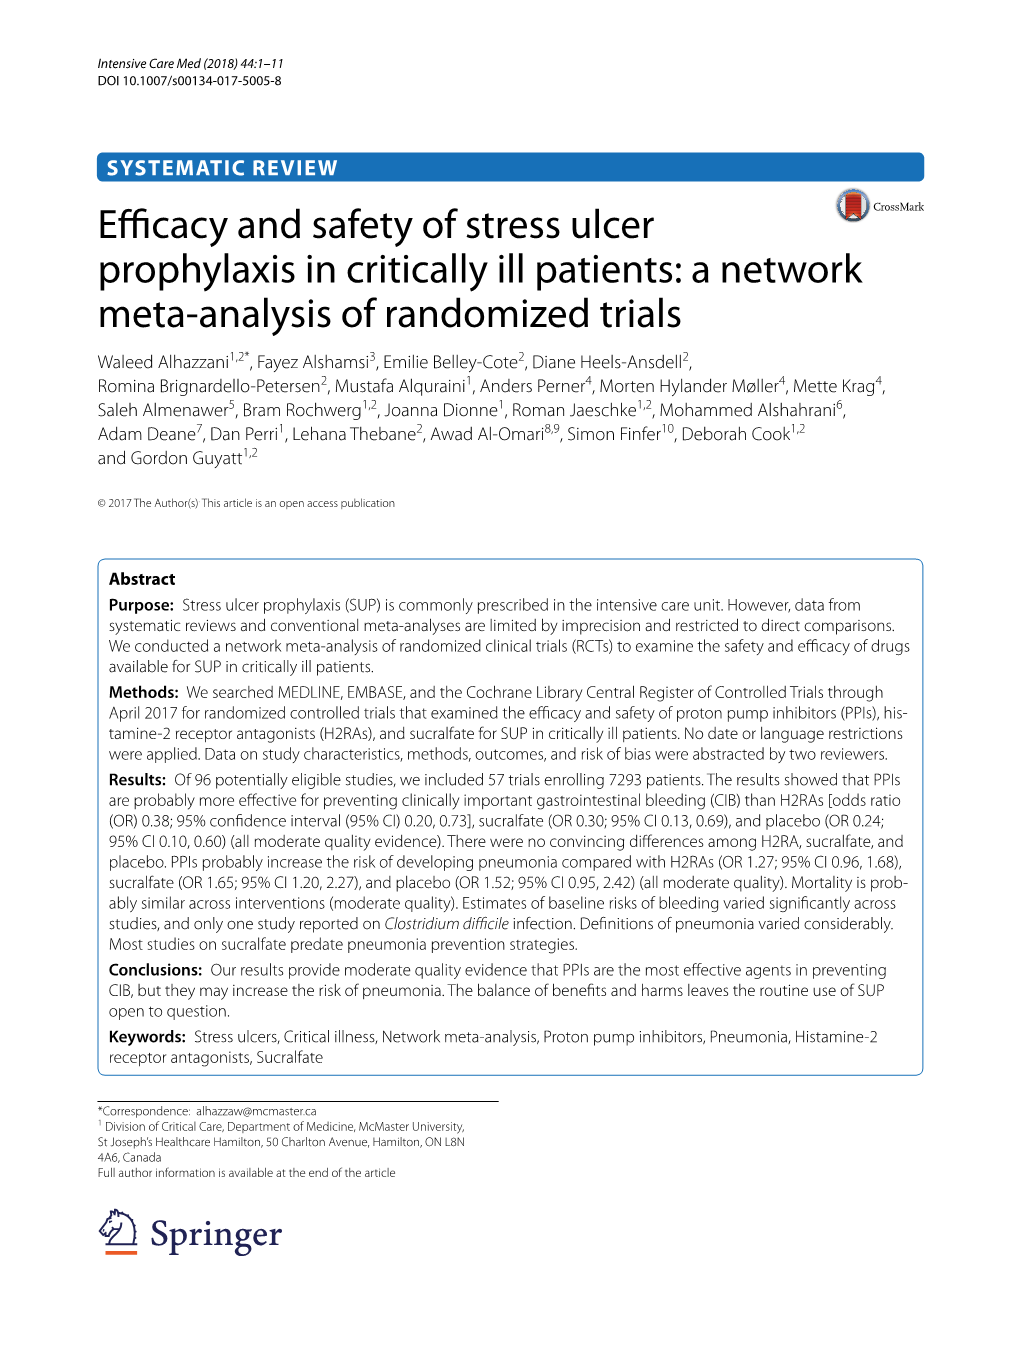 Efficacy and Safety of Stress Ulcer Prophylaxis in Critically Ill Patients: a Network Meta-Analysis of Randomized Trials